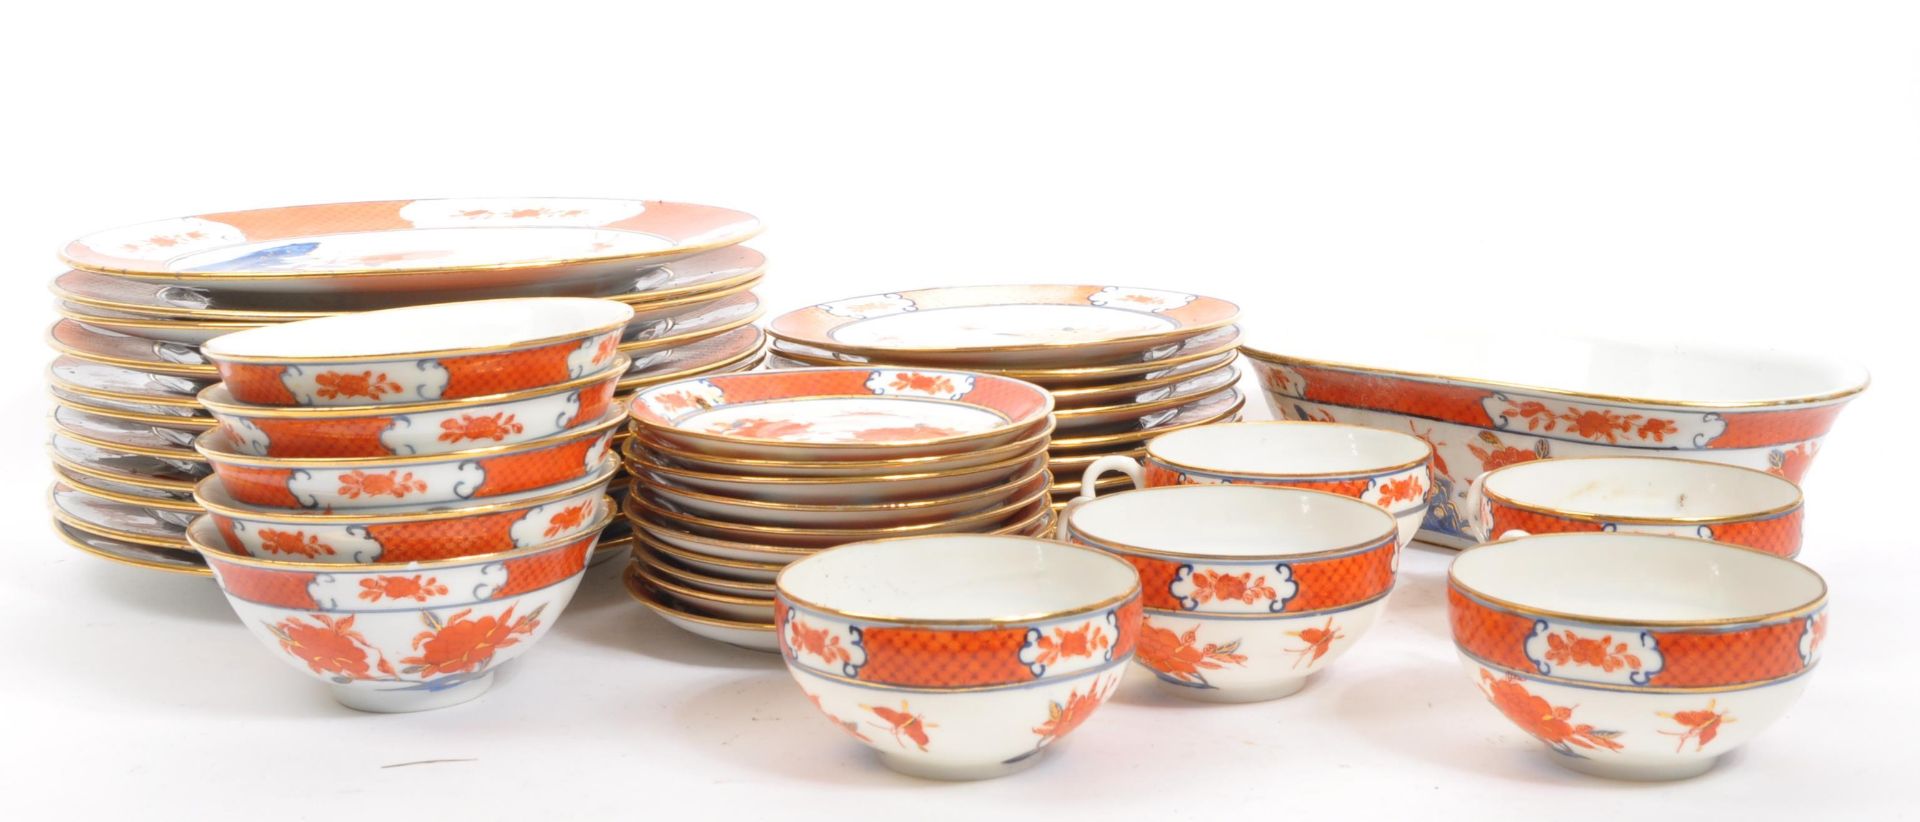 EARLY 20TH CENTURY CHINESE ORIENTAL PORCELAIN DINNER SERVICE